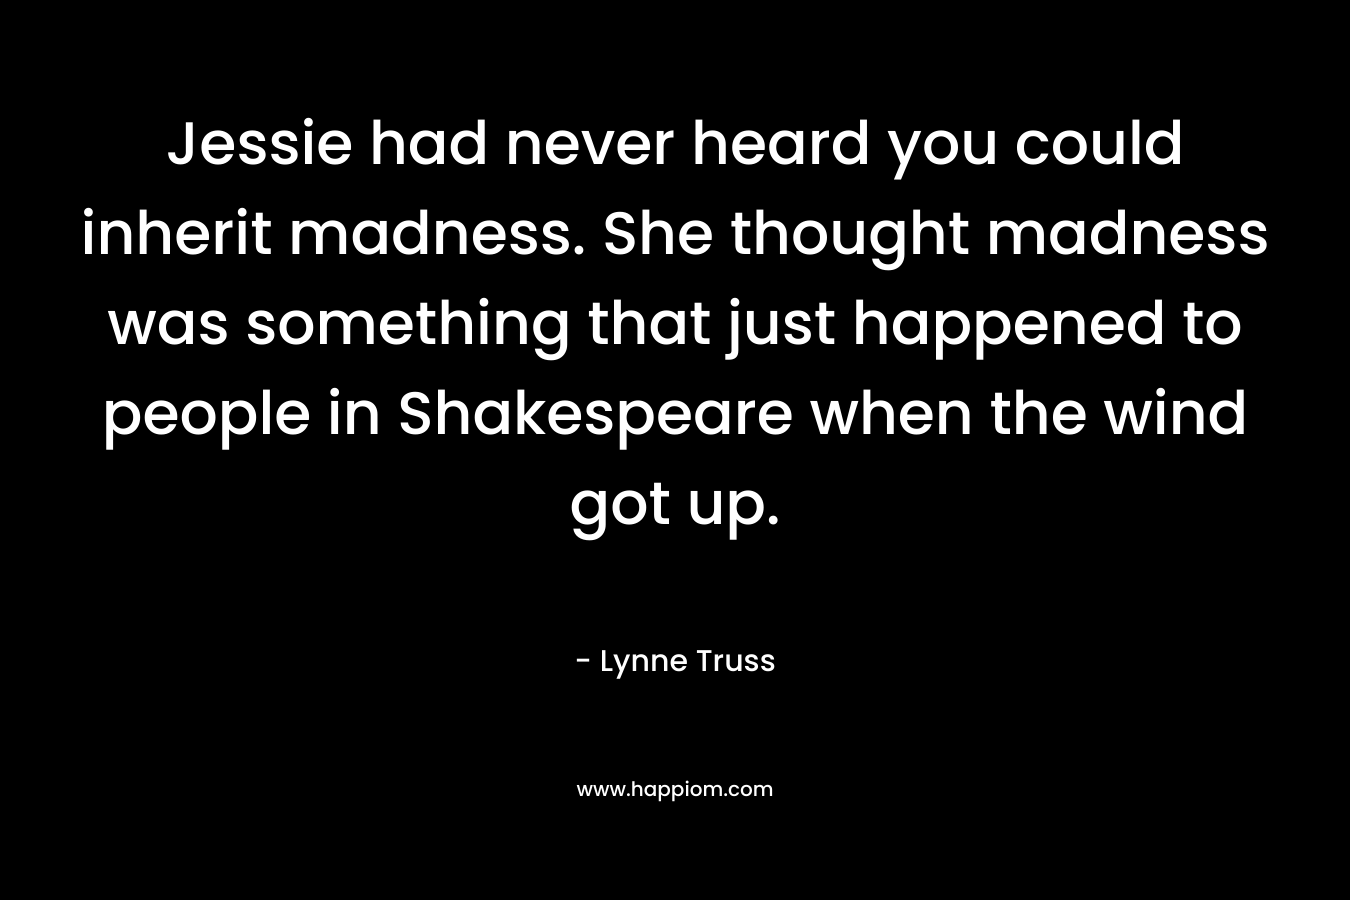 Jessie had never heard you could inherit madness. She thought madness was something that just happened to people in Shakespeare when the wind got up. – Lynne Truss